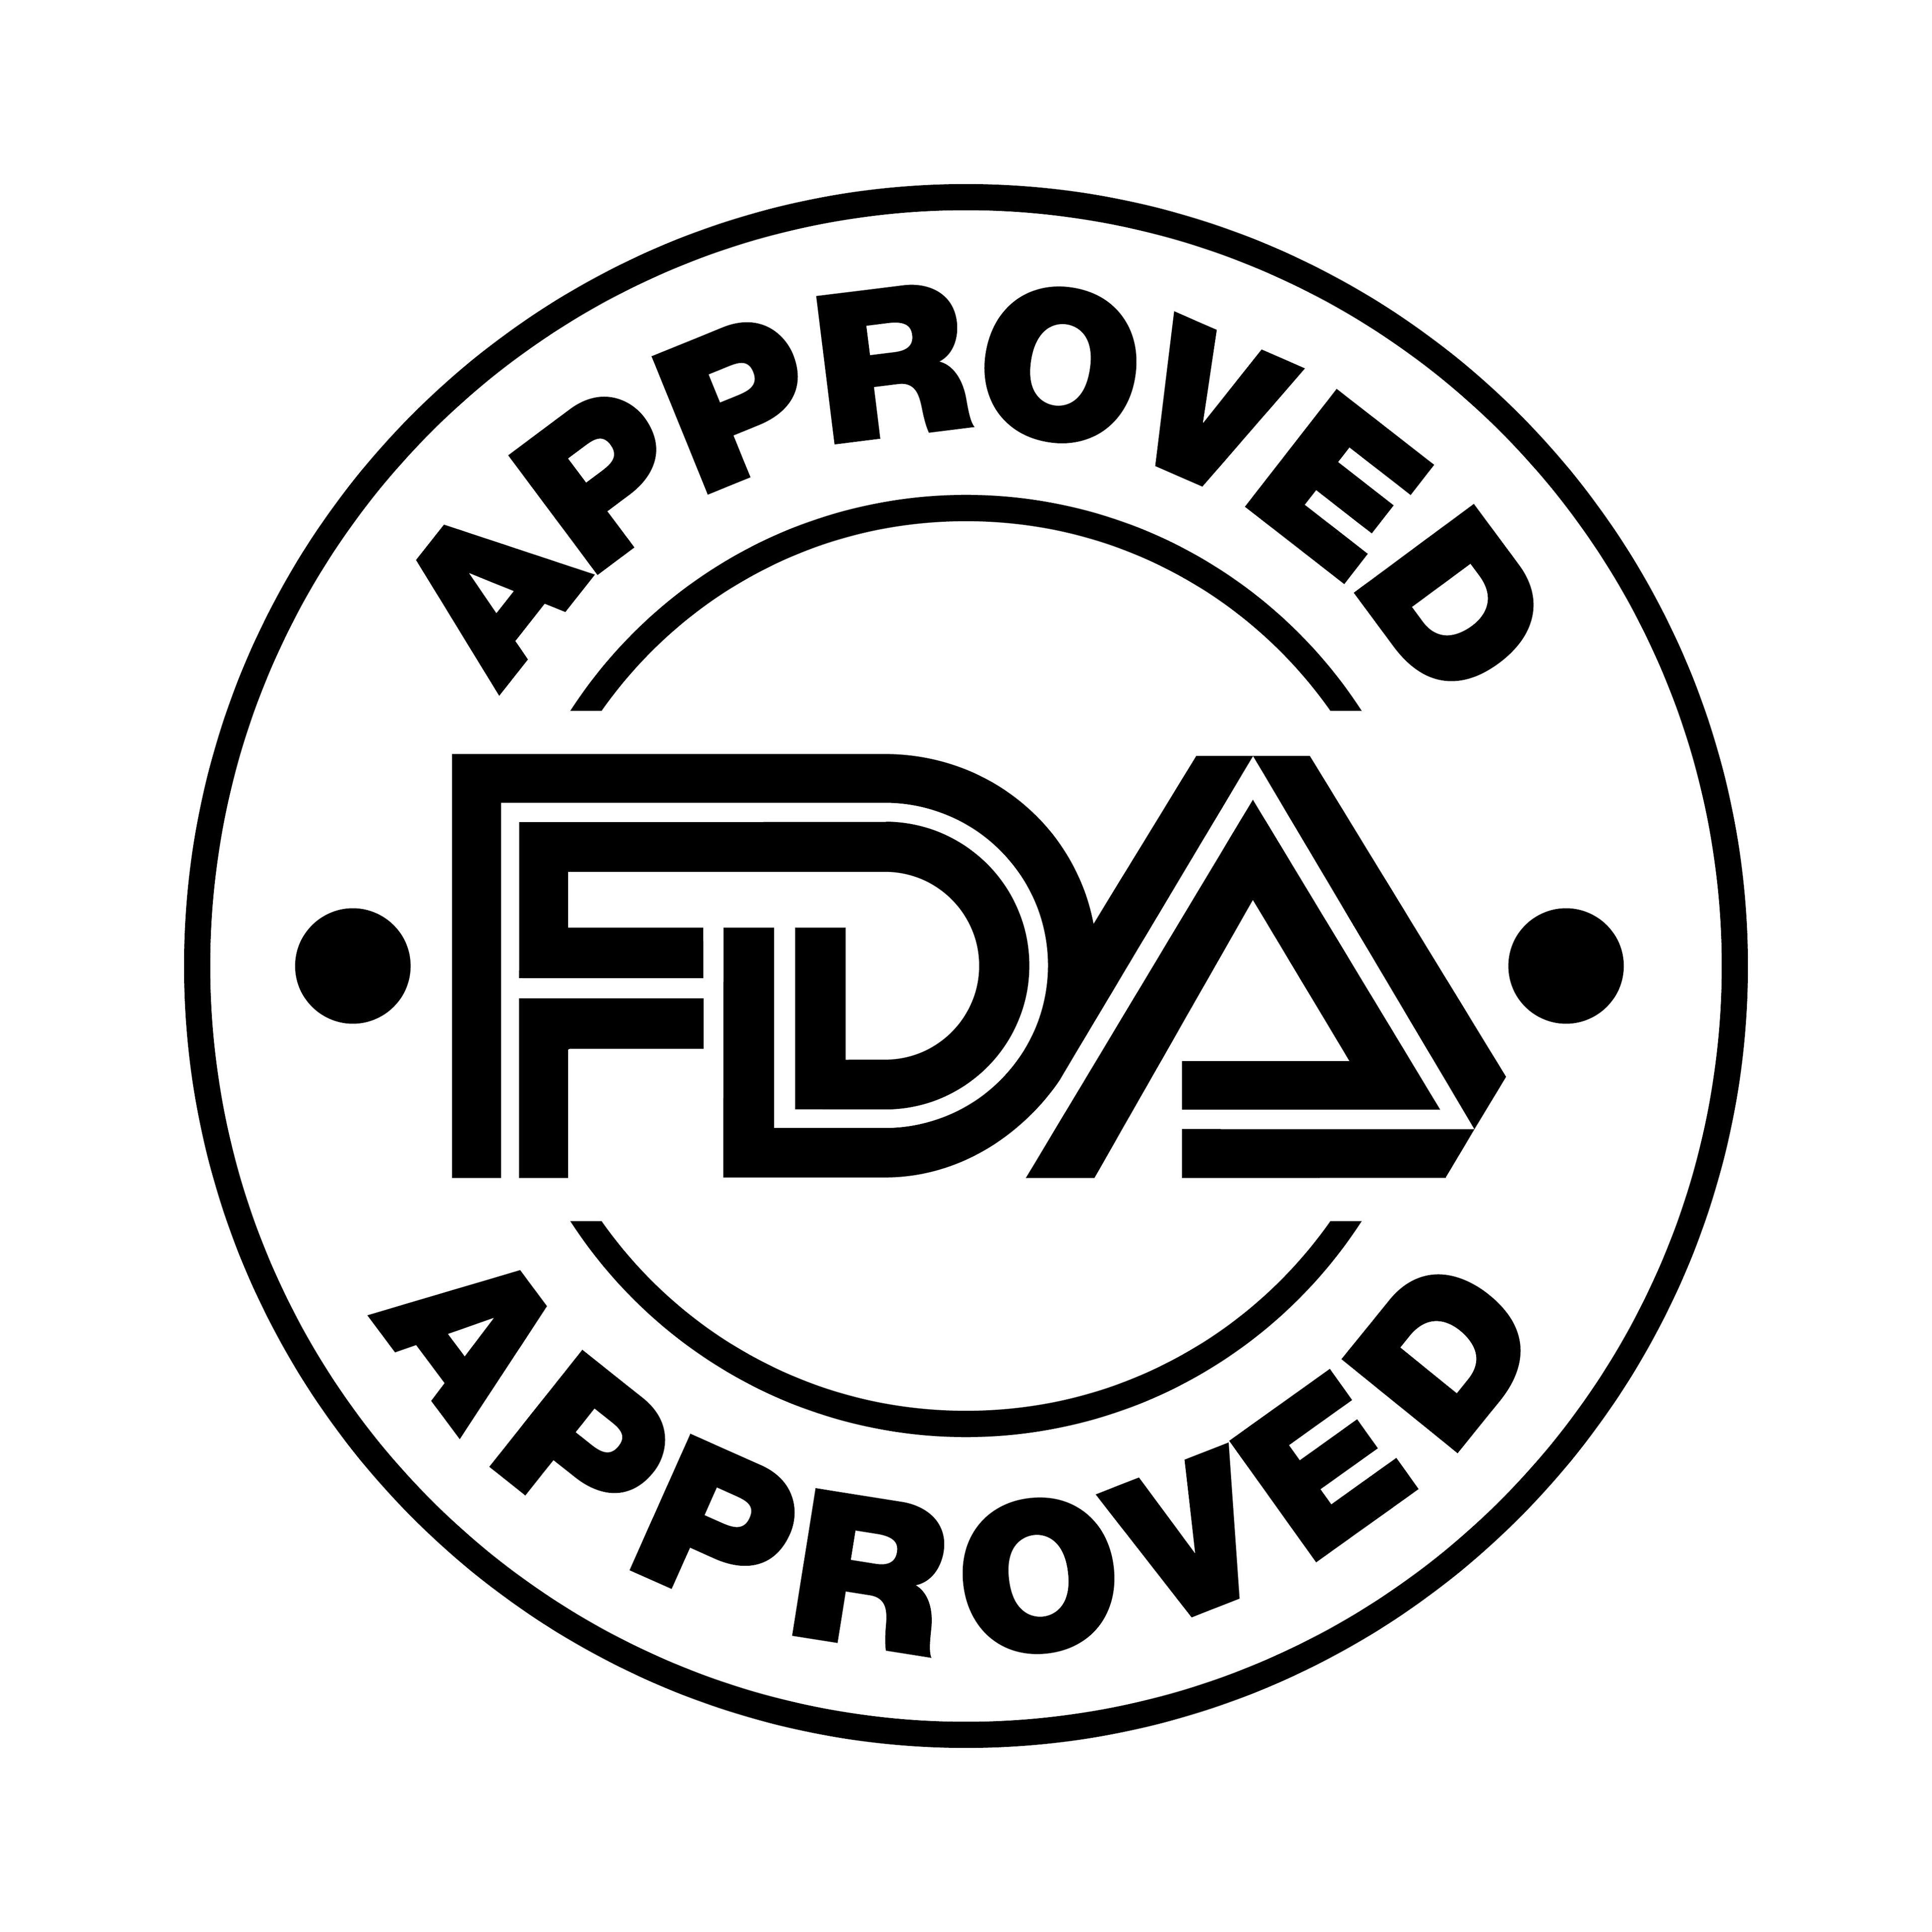 Follow-Up Trials for Drugs with Accelerated Approval Often Miss FDA Deadline